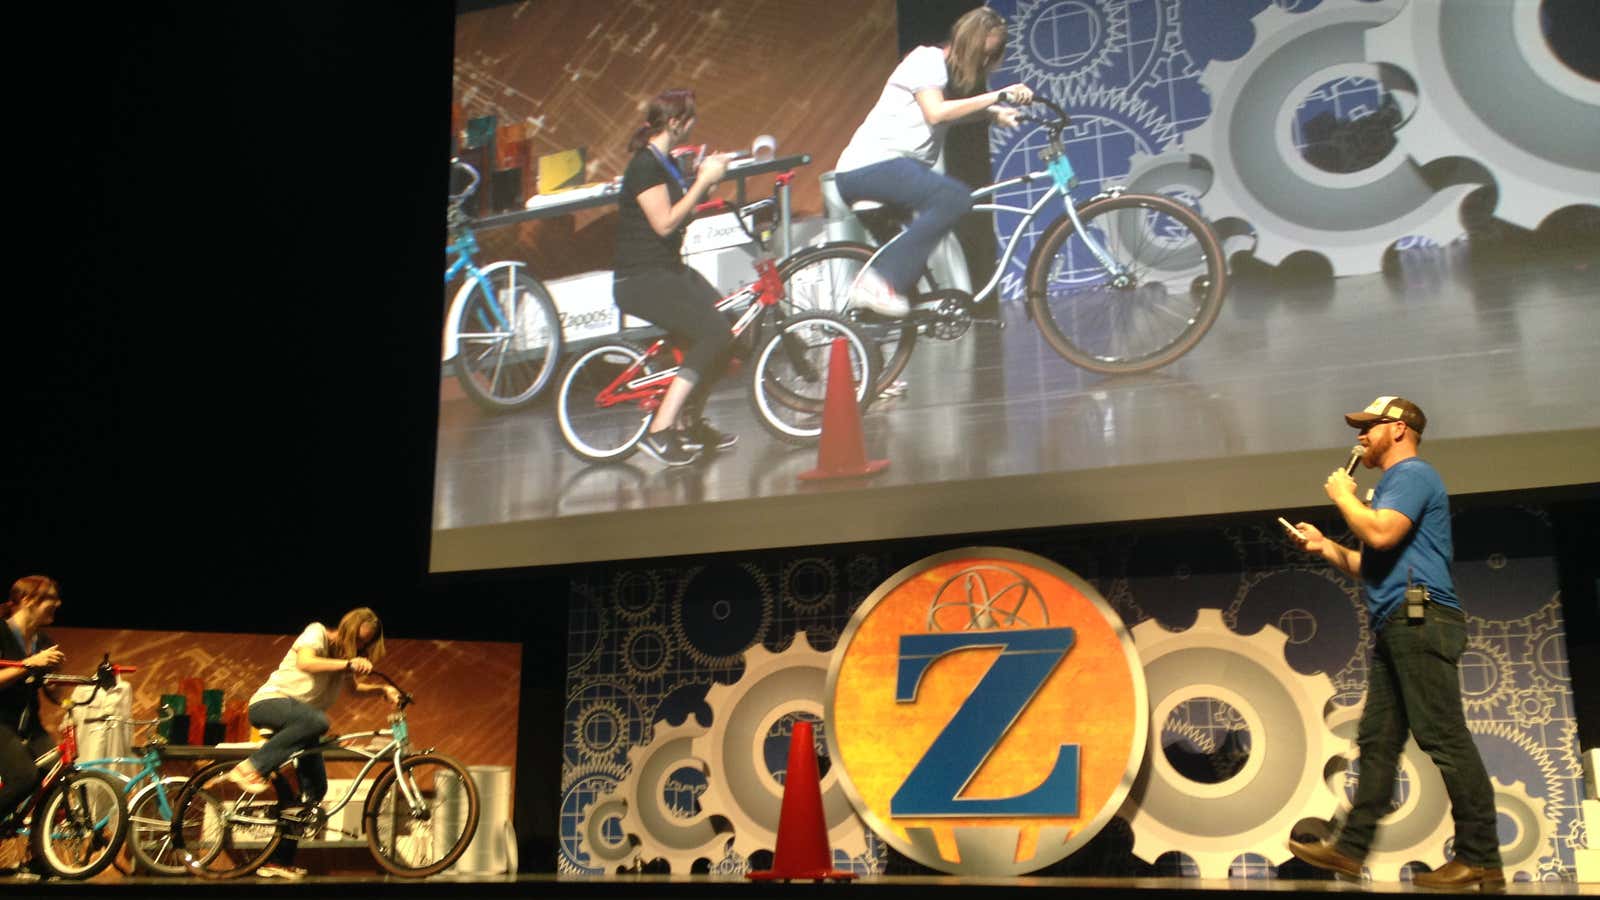 Zappos All-Hands meeting in May.